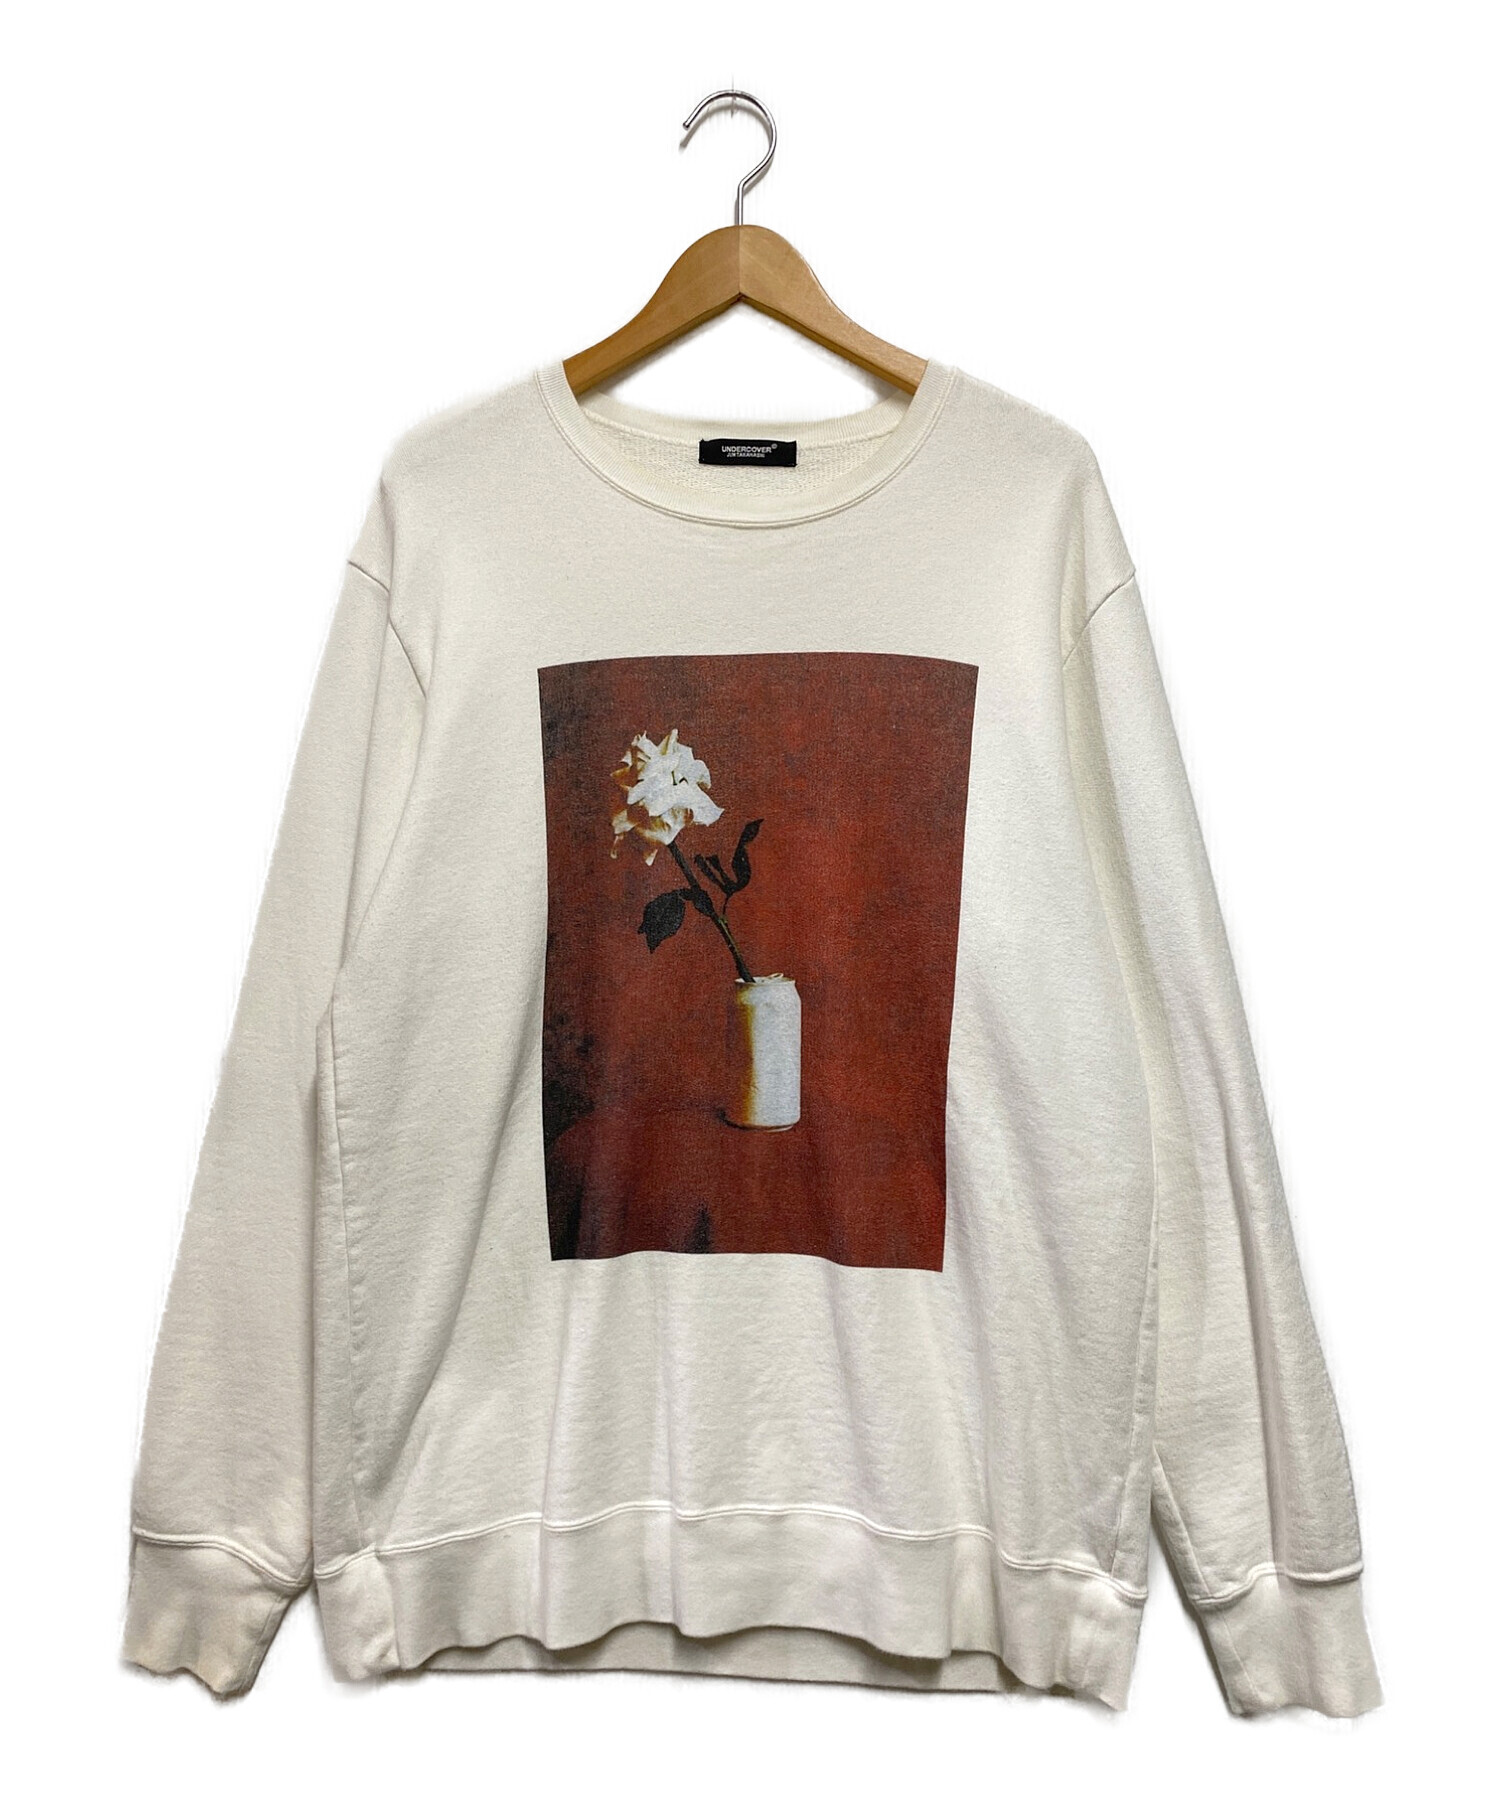 undercoverWasted Youth × UNDERCOVER crew neck - スウェット